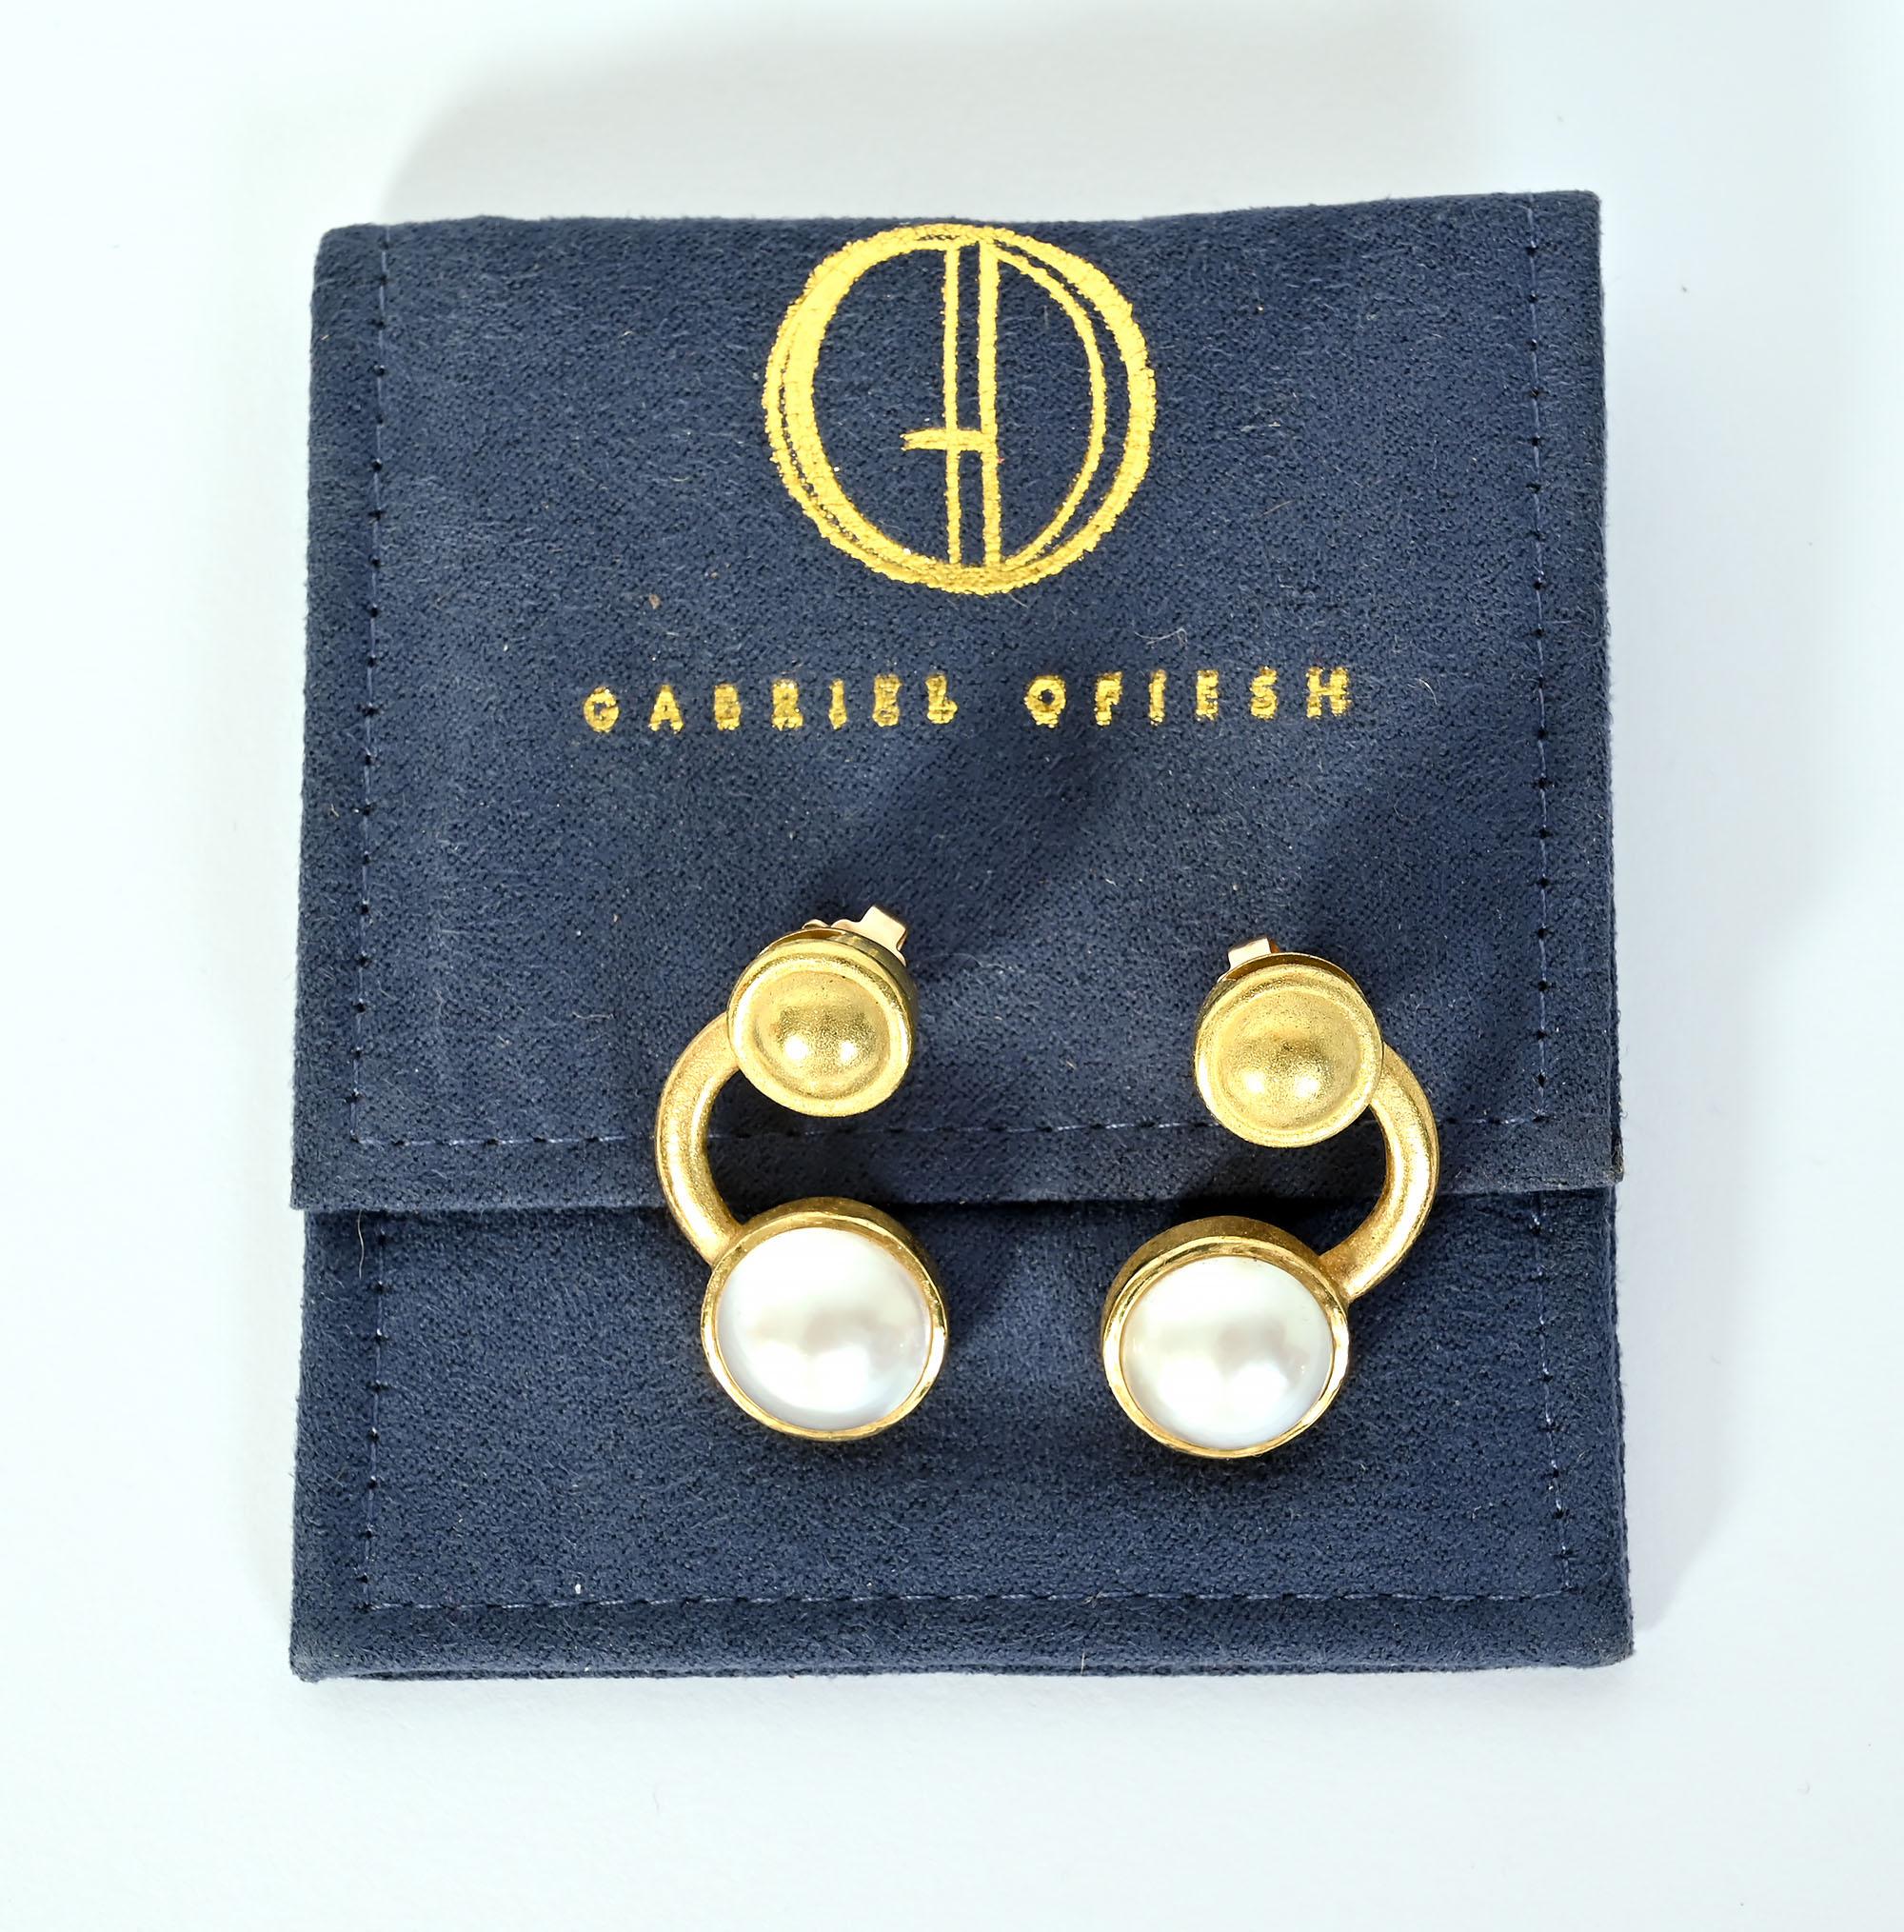 Contemporary style earrings by American jeweler, Gabriel Ofiesh. The earrings consist of a 13mm pearl in a collar bezel. On top of that is a 10mm gold dome, also with a collar bezel. The gold dome swivels. The earrings are for pierced ears. They